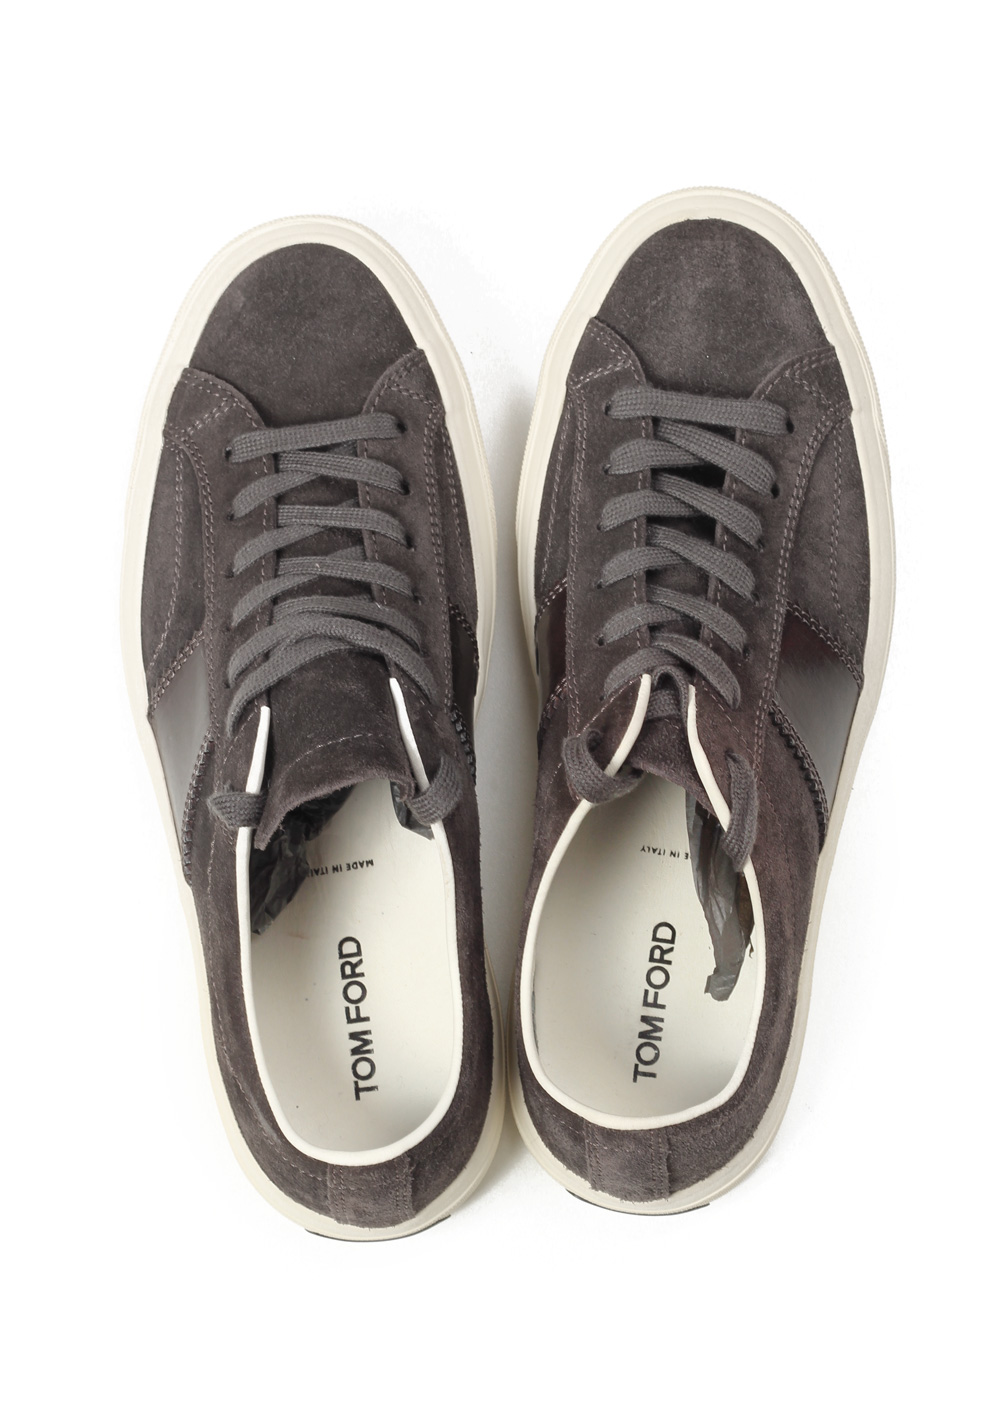 TOM FORD Cambridge Lace Up Dark Gray Suede Sneaker Shoes Size 11 UK / 12 U.S. | Costume Limité